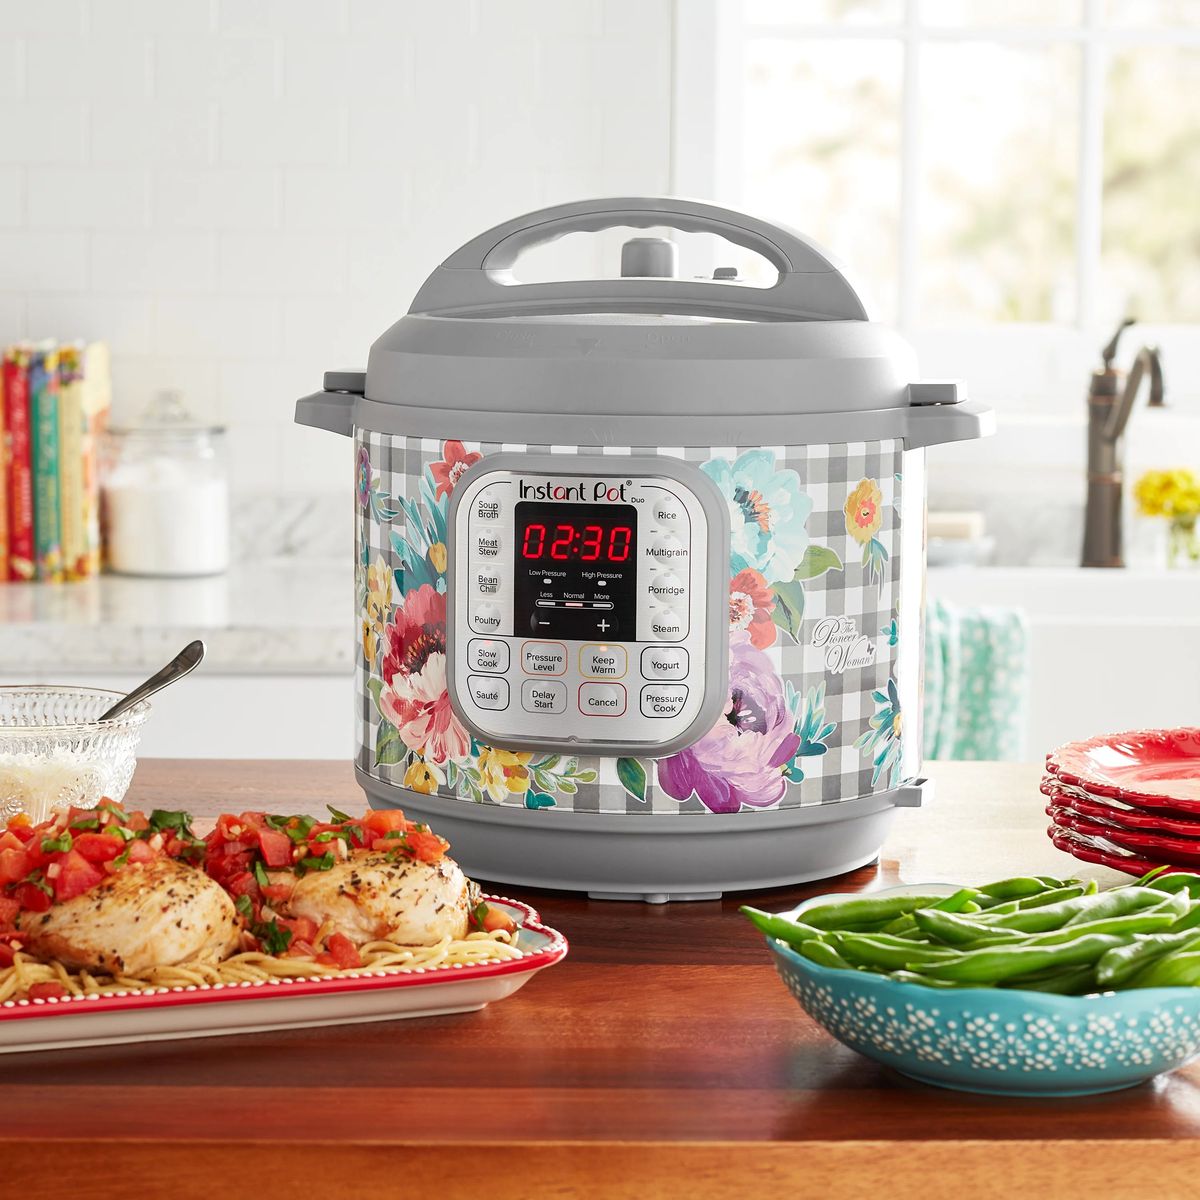 https://hips.hearstapps.com/hmg-prod/images/the-pioneer-woman-instant-pot-64121330572bb.jpeg?crop=1.00xw:1.00xh;0,0&resize=1200:*